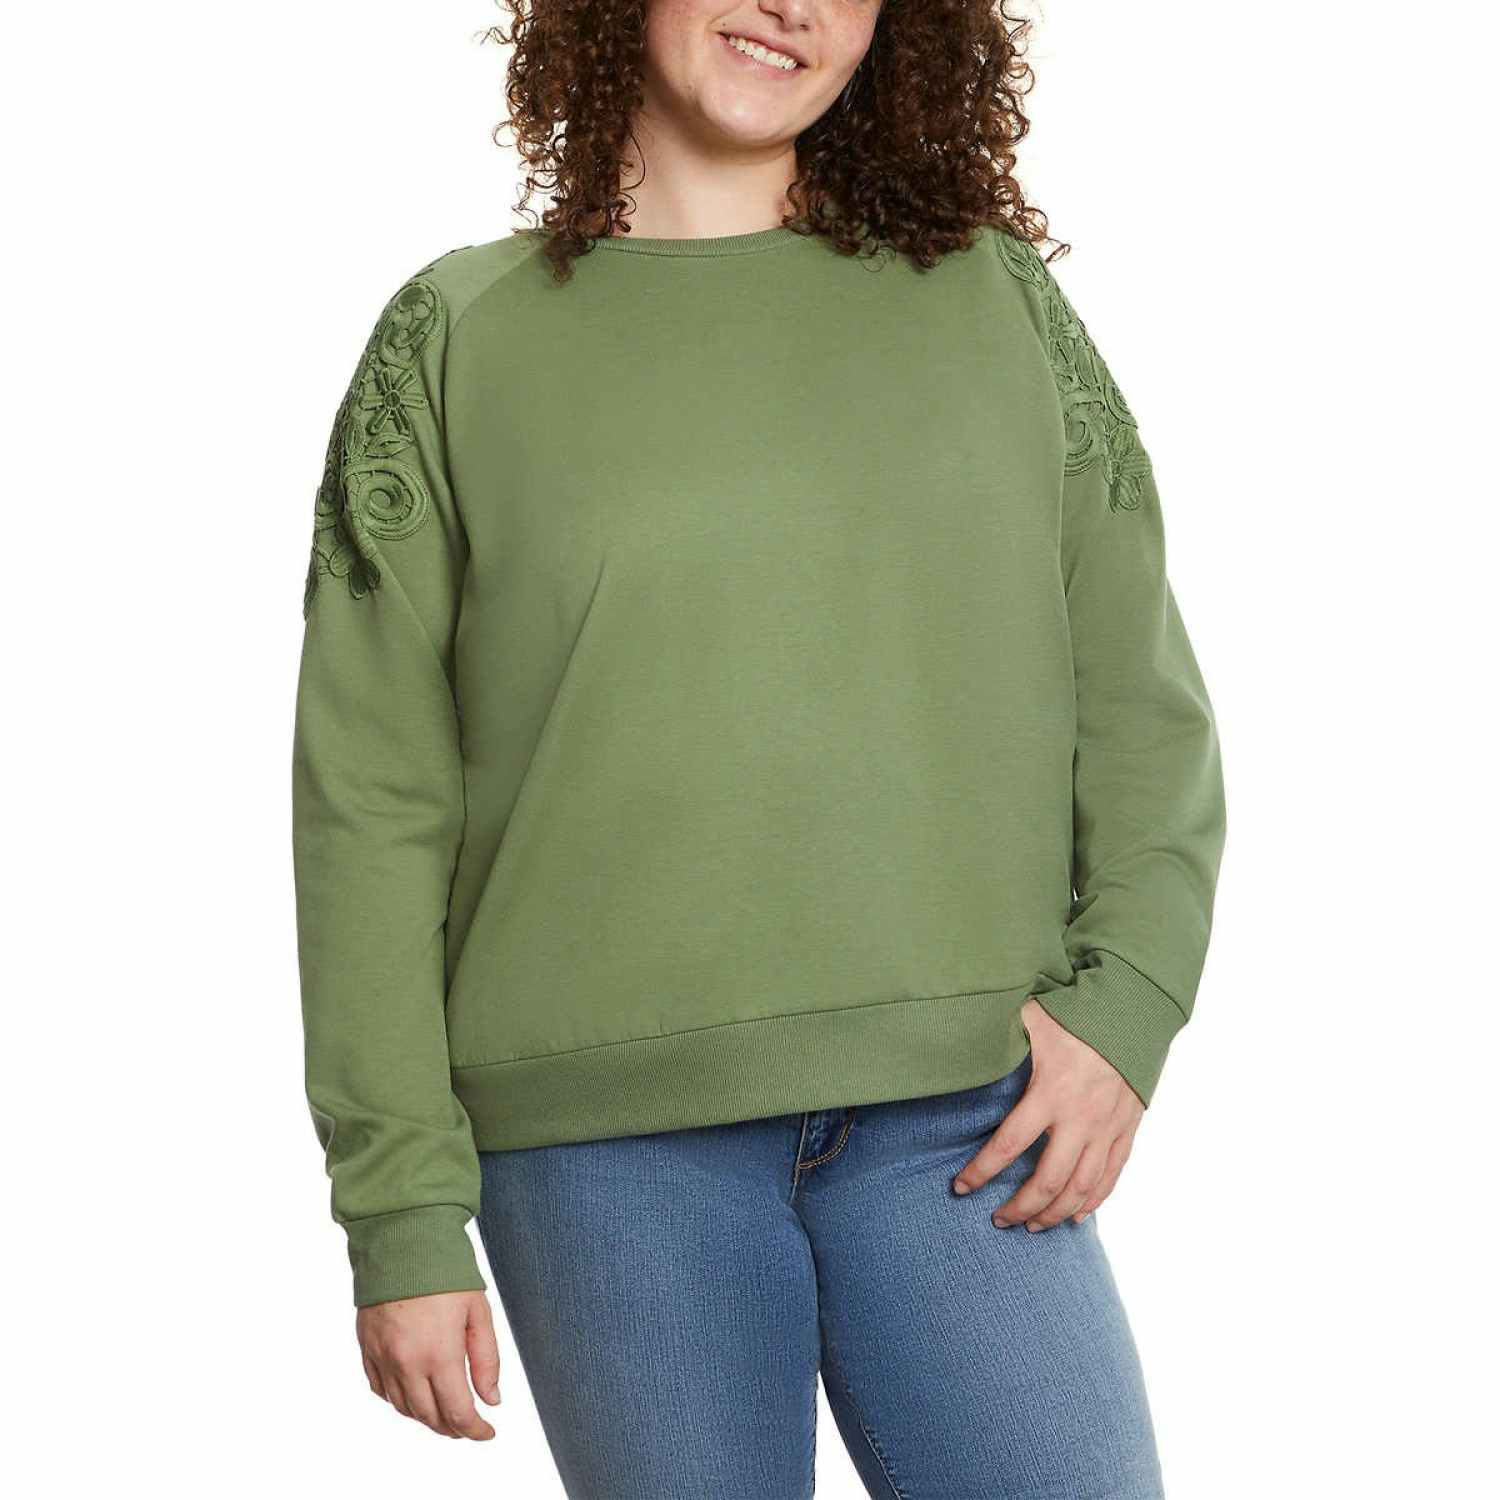 woman wearing a green pullover with lace on the sleeves